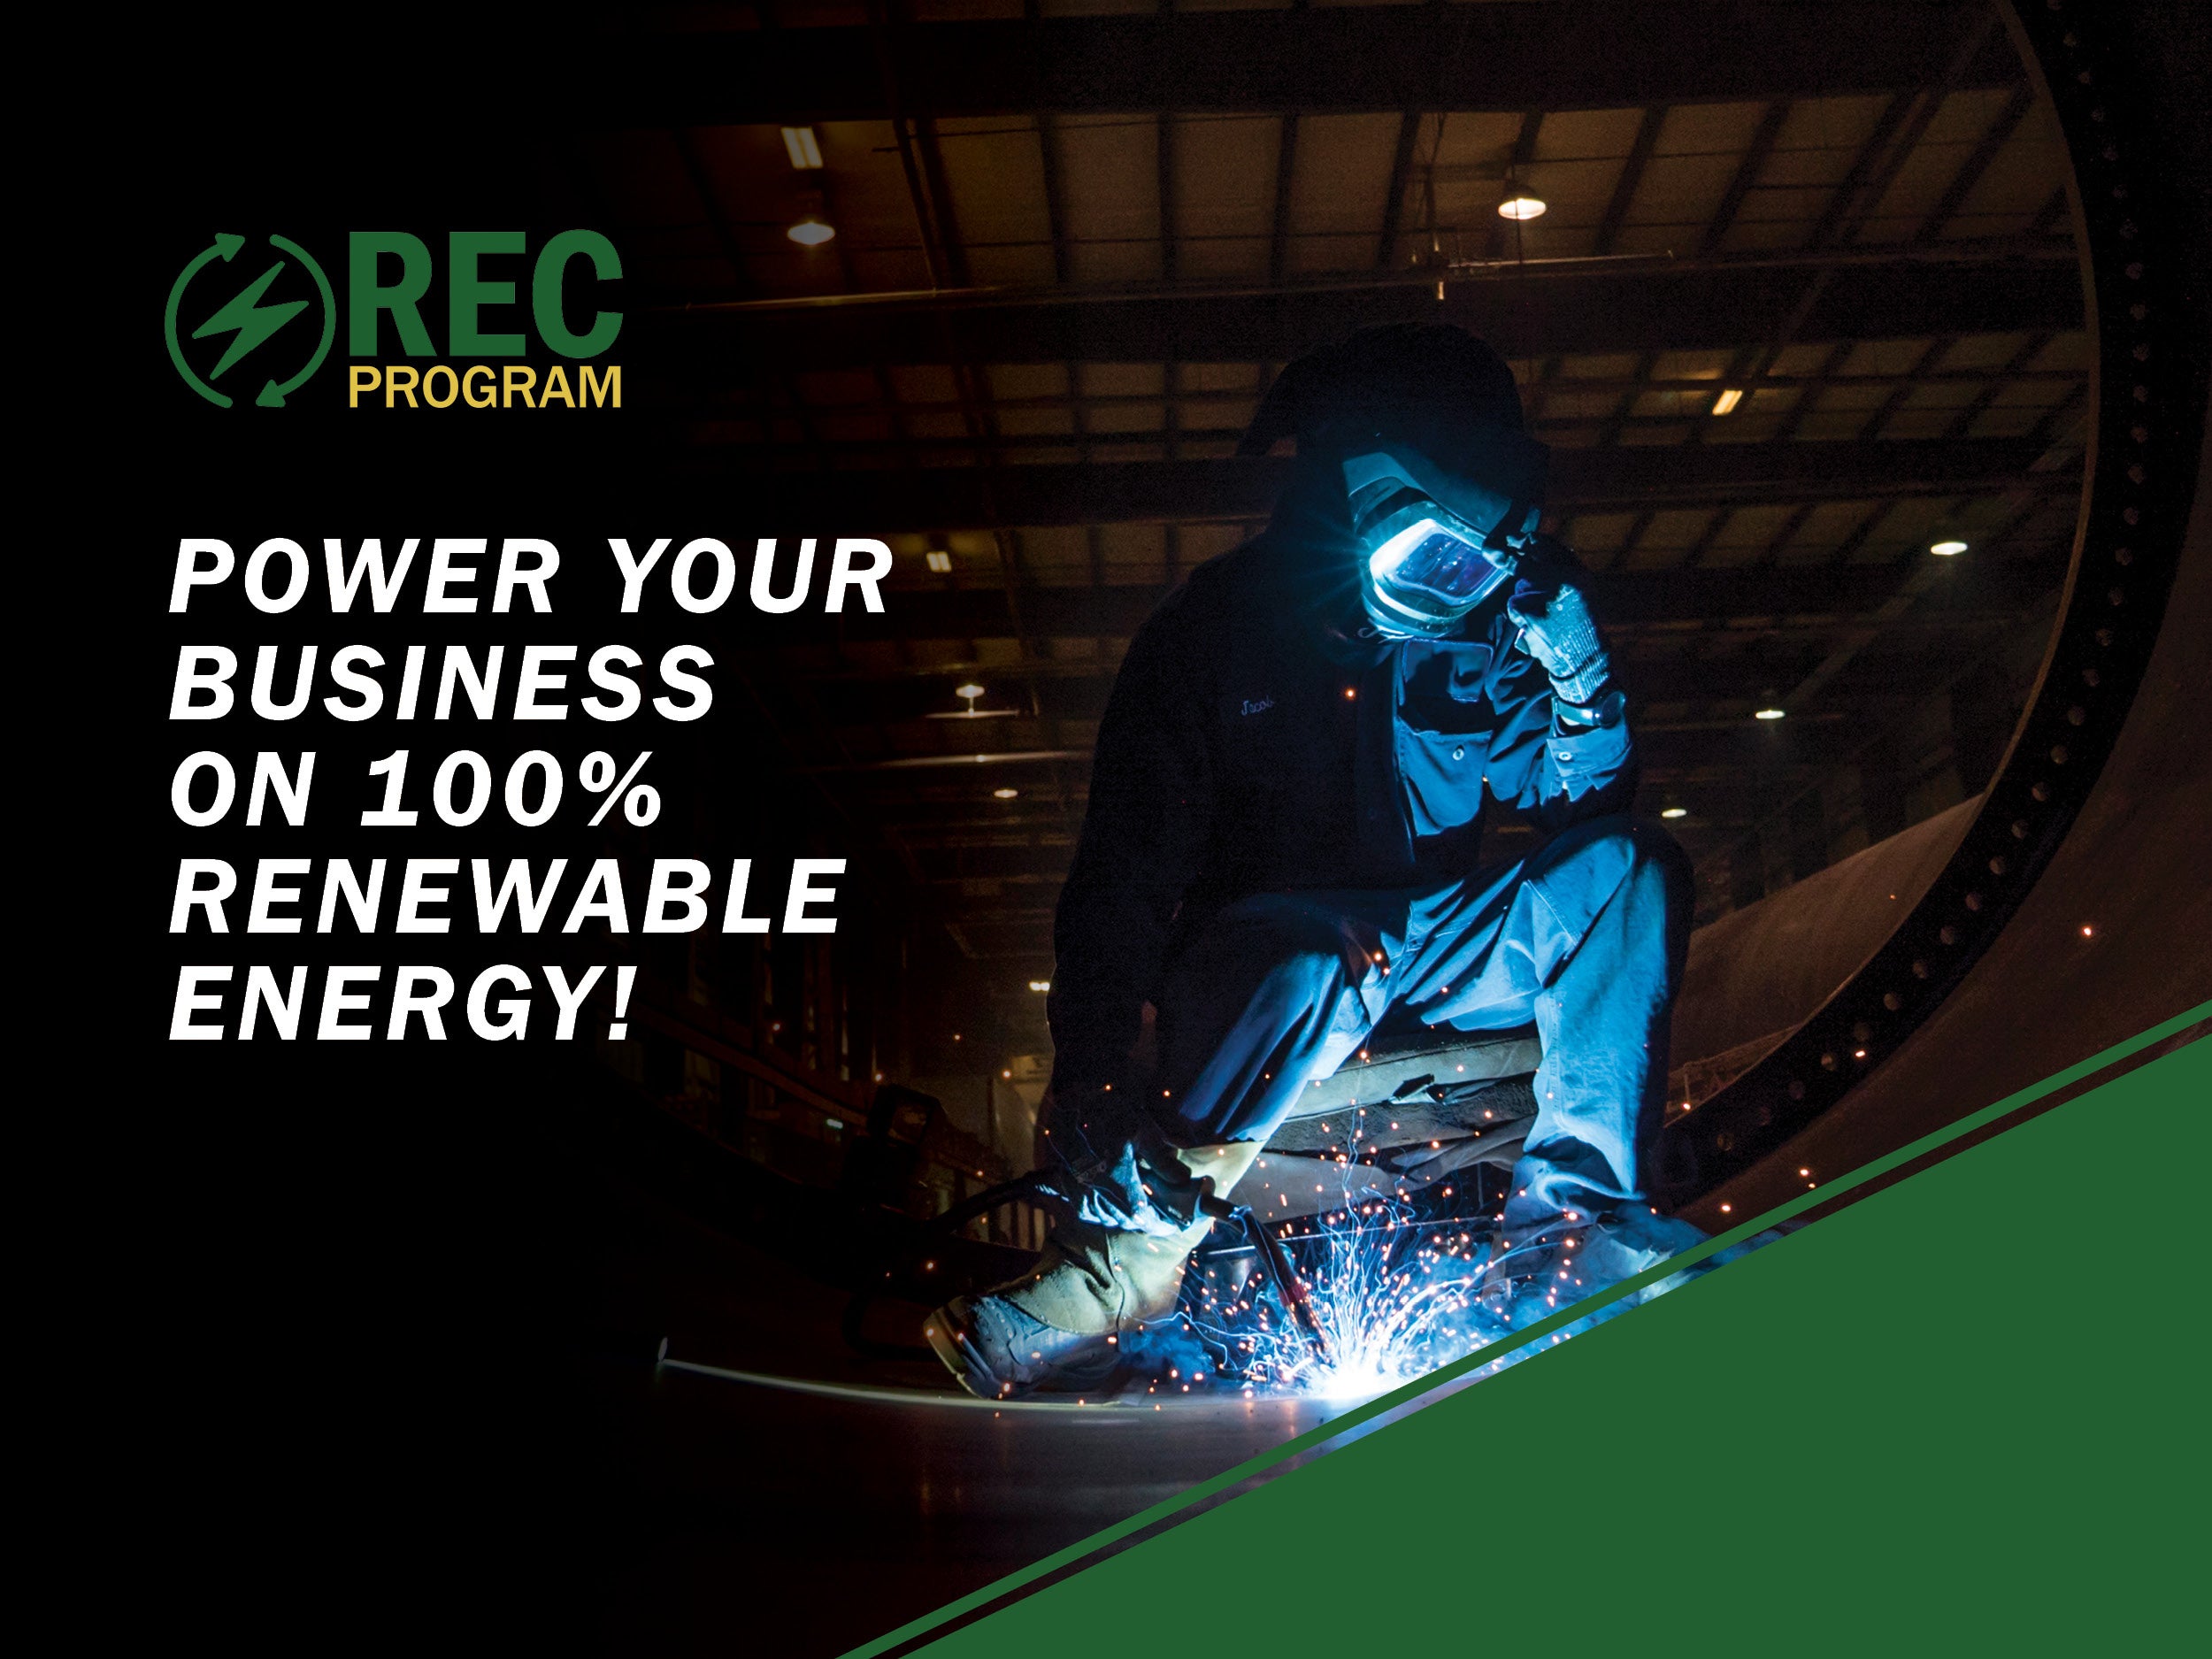 Power your Business on 100% renewable